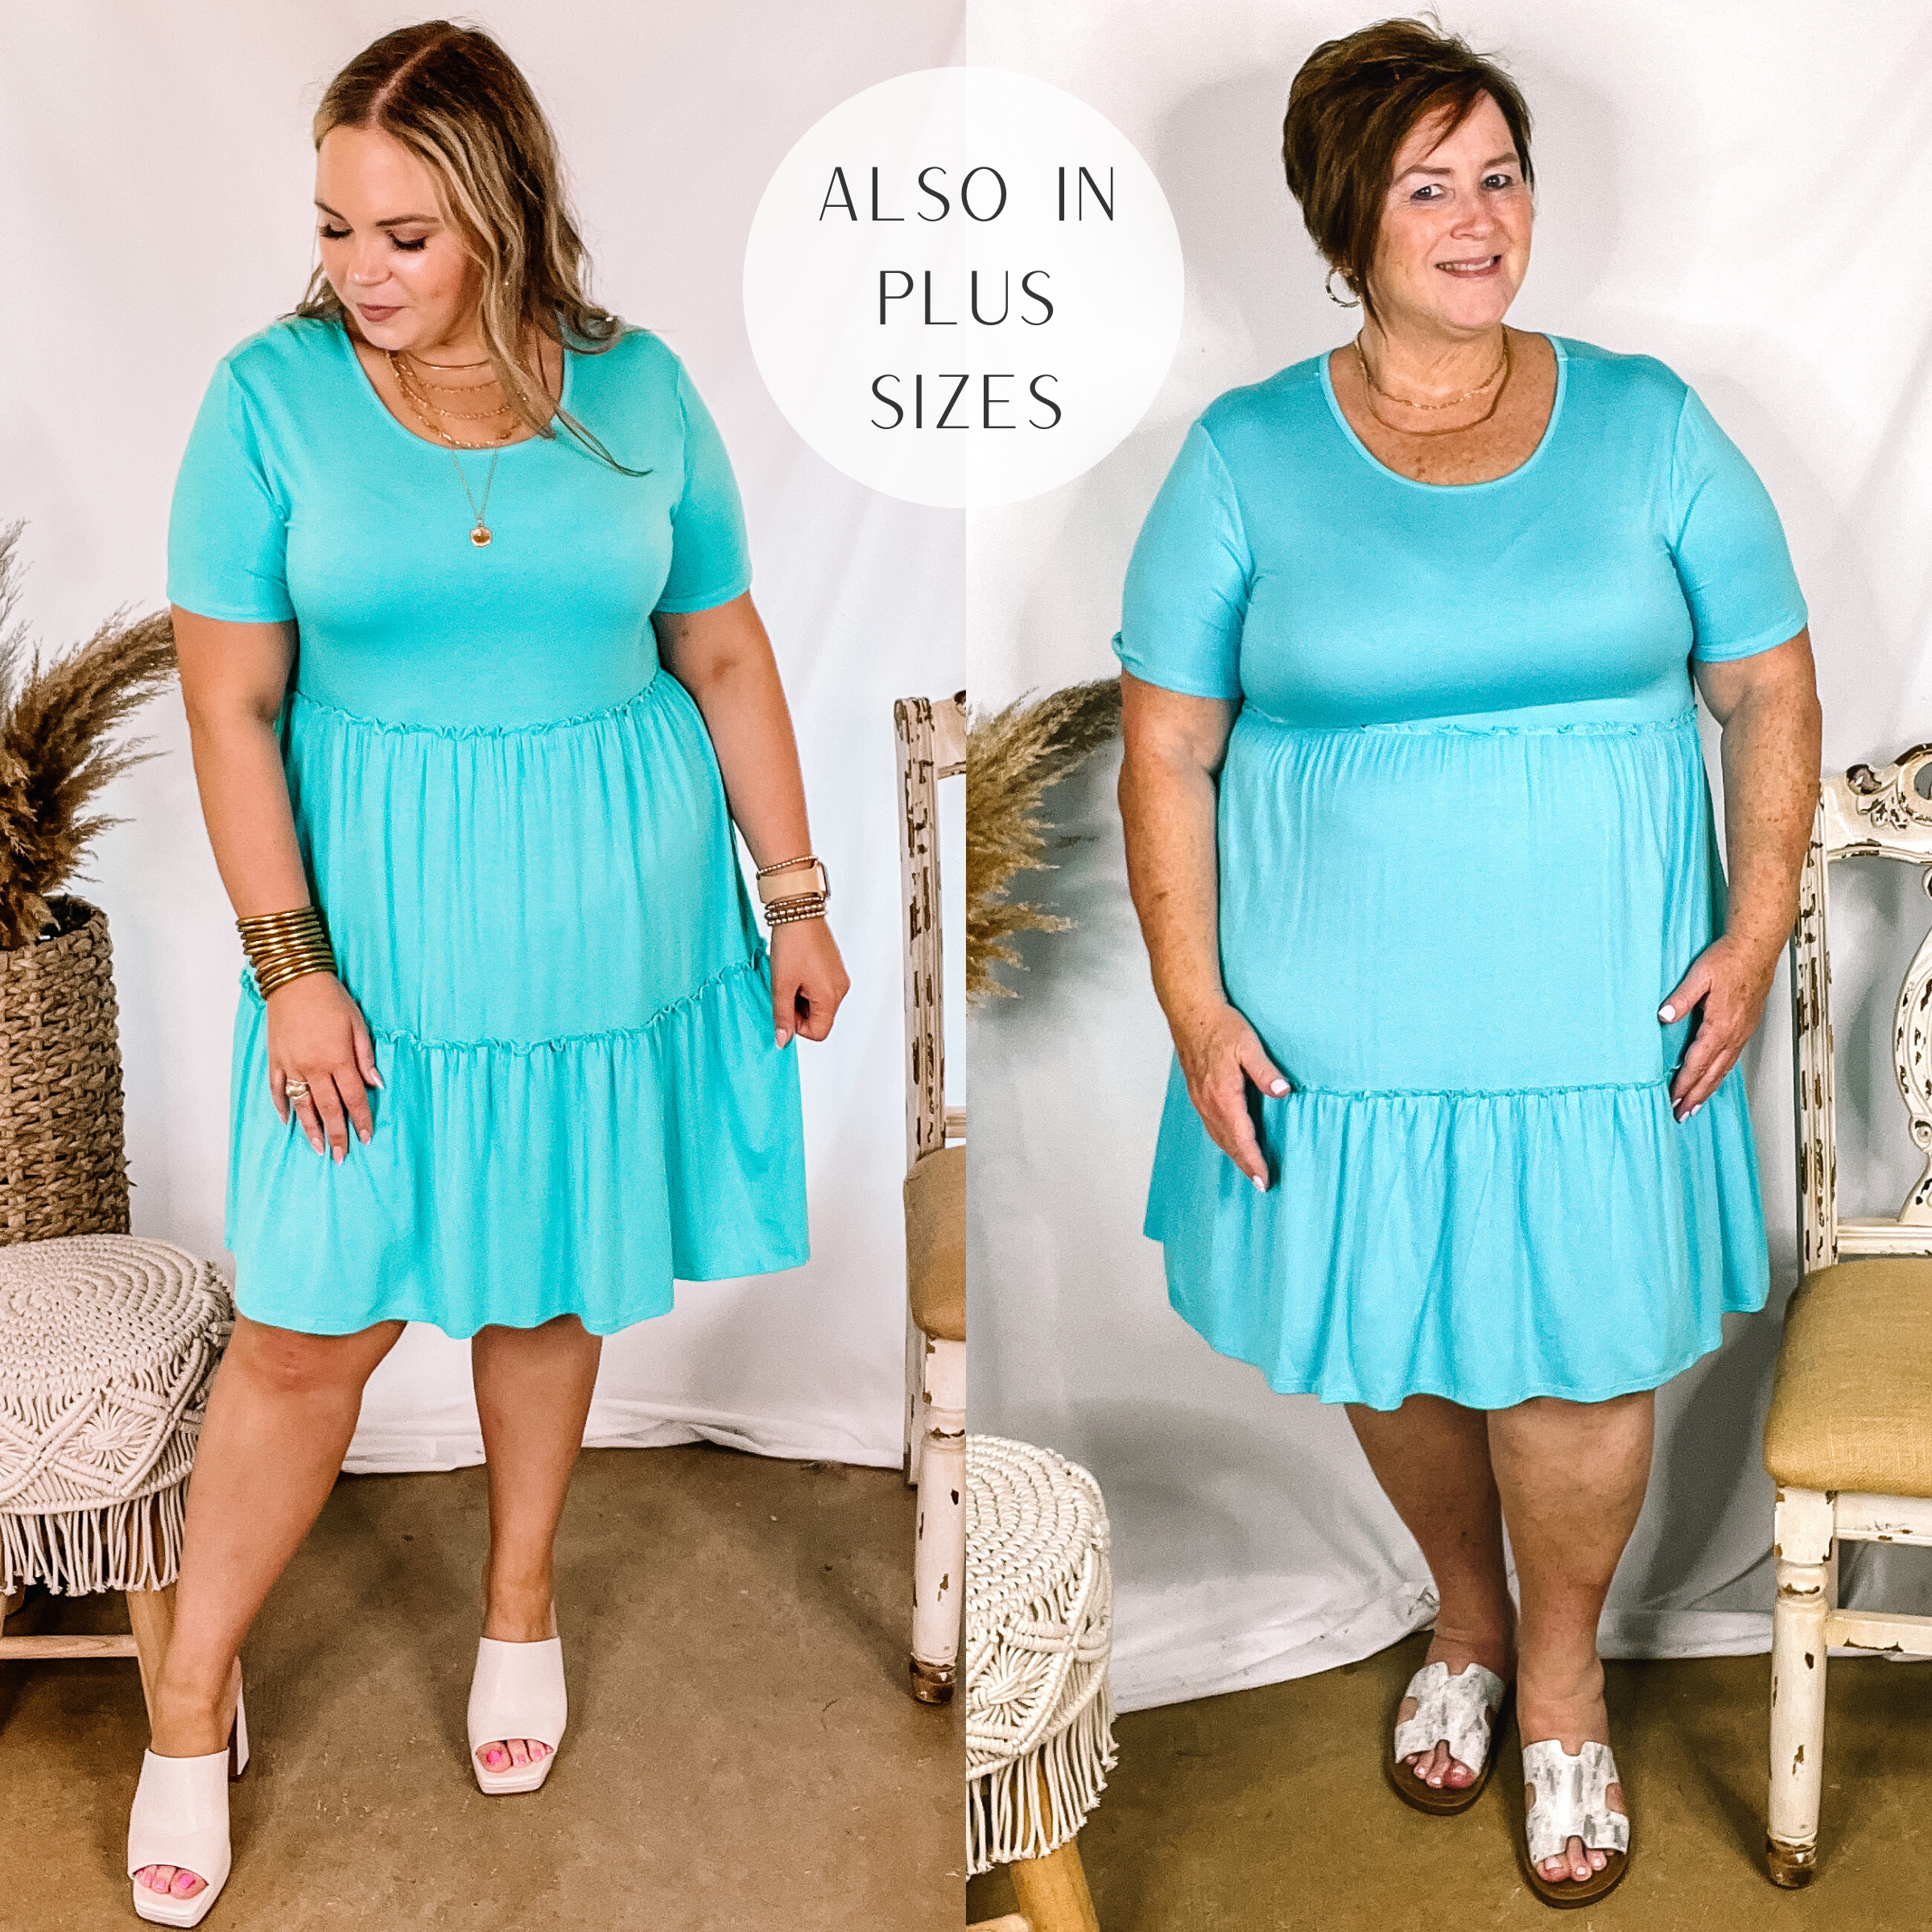 Models are wearing a blue tiered dress with short sleeves. Size large model has it paired with white heels and gold jewelry. Plus size model has it paired with white sandals and gold jewelry.